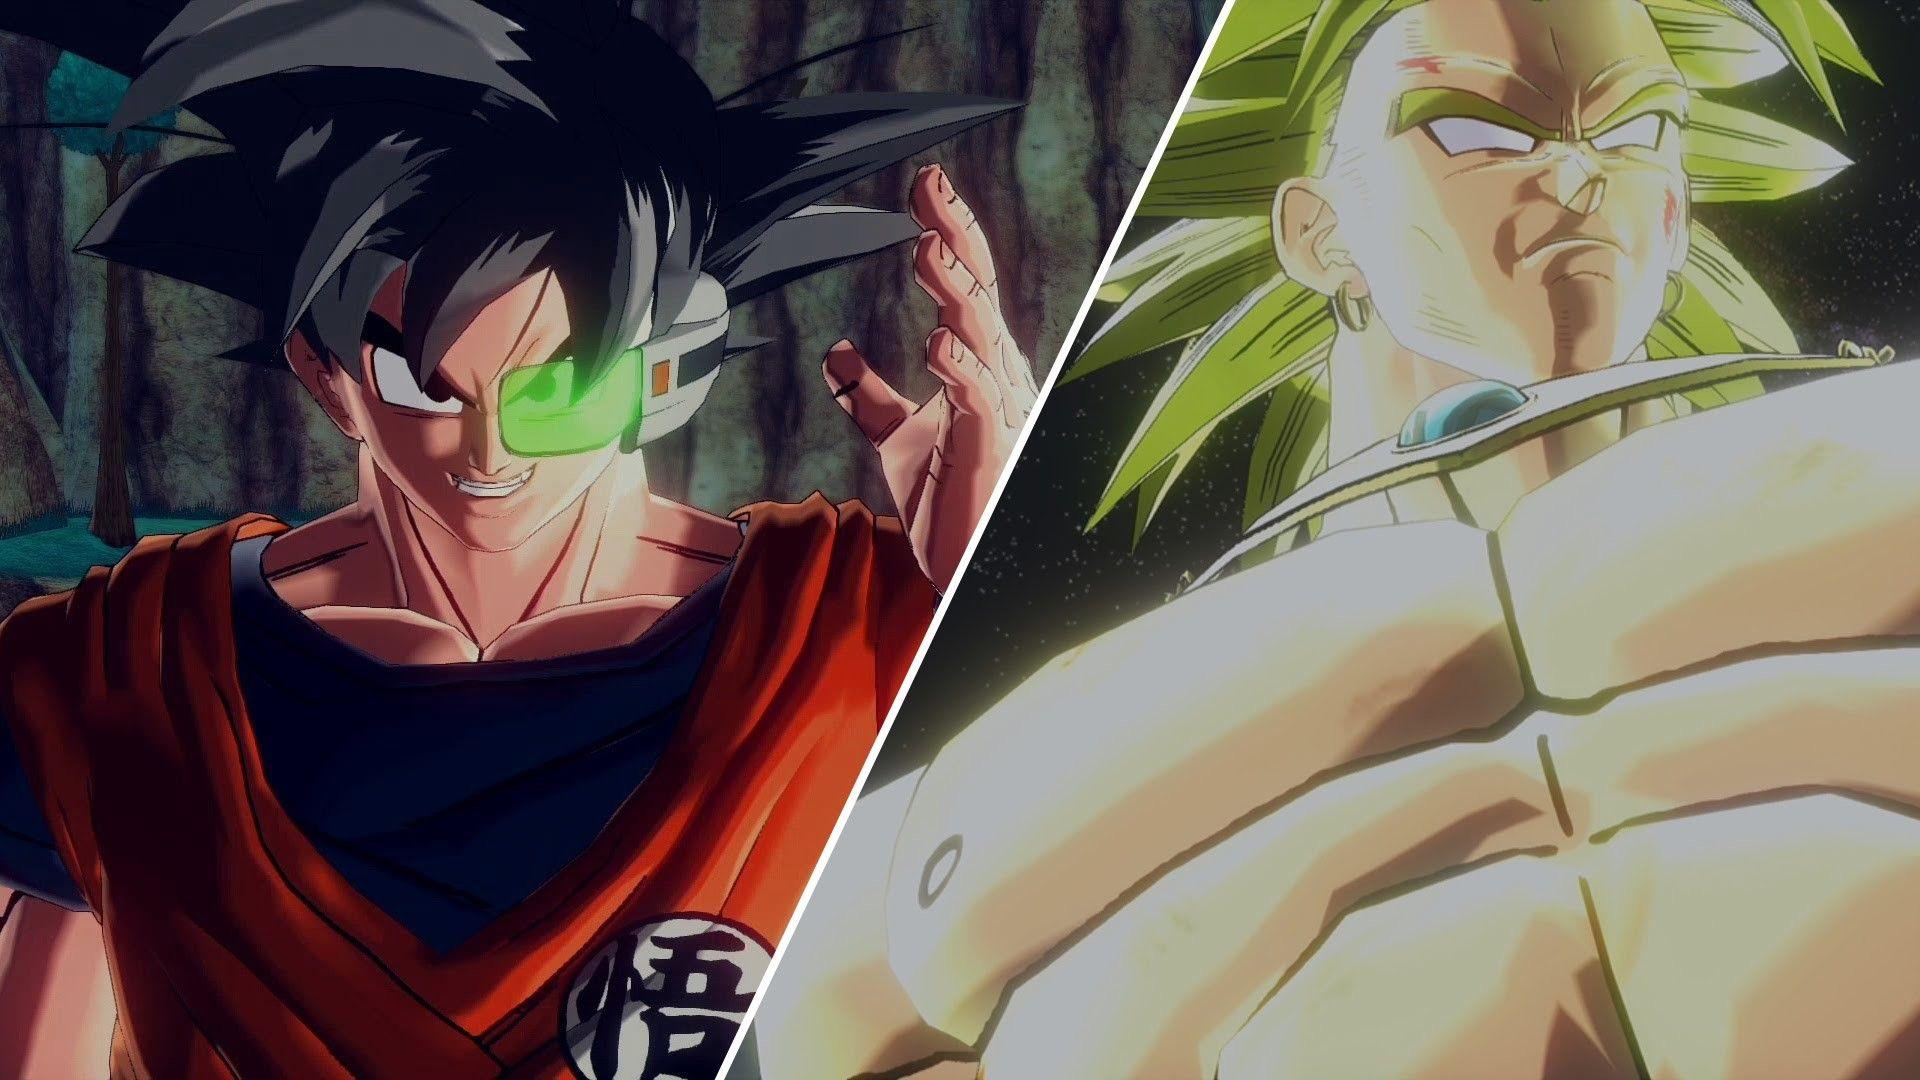 Goku Vs Broly Wallpapergoku Vs Broly Wallpaper 1920x1080 For Mac PIC